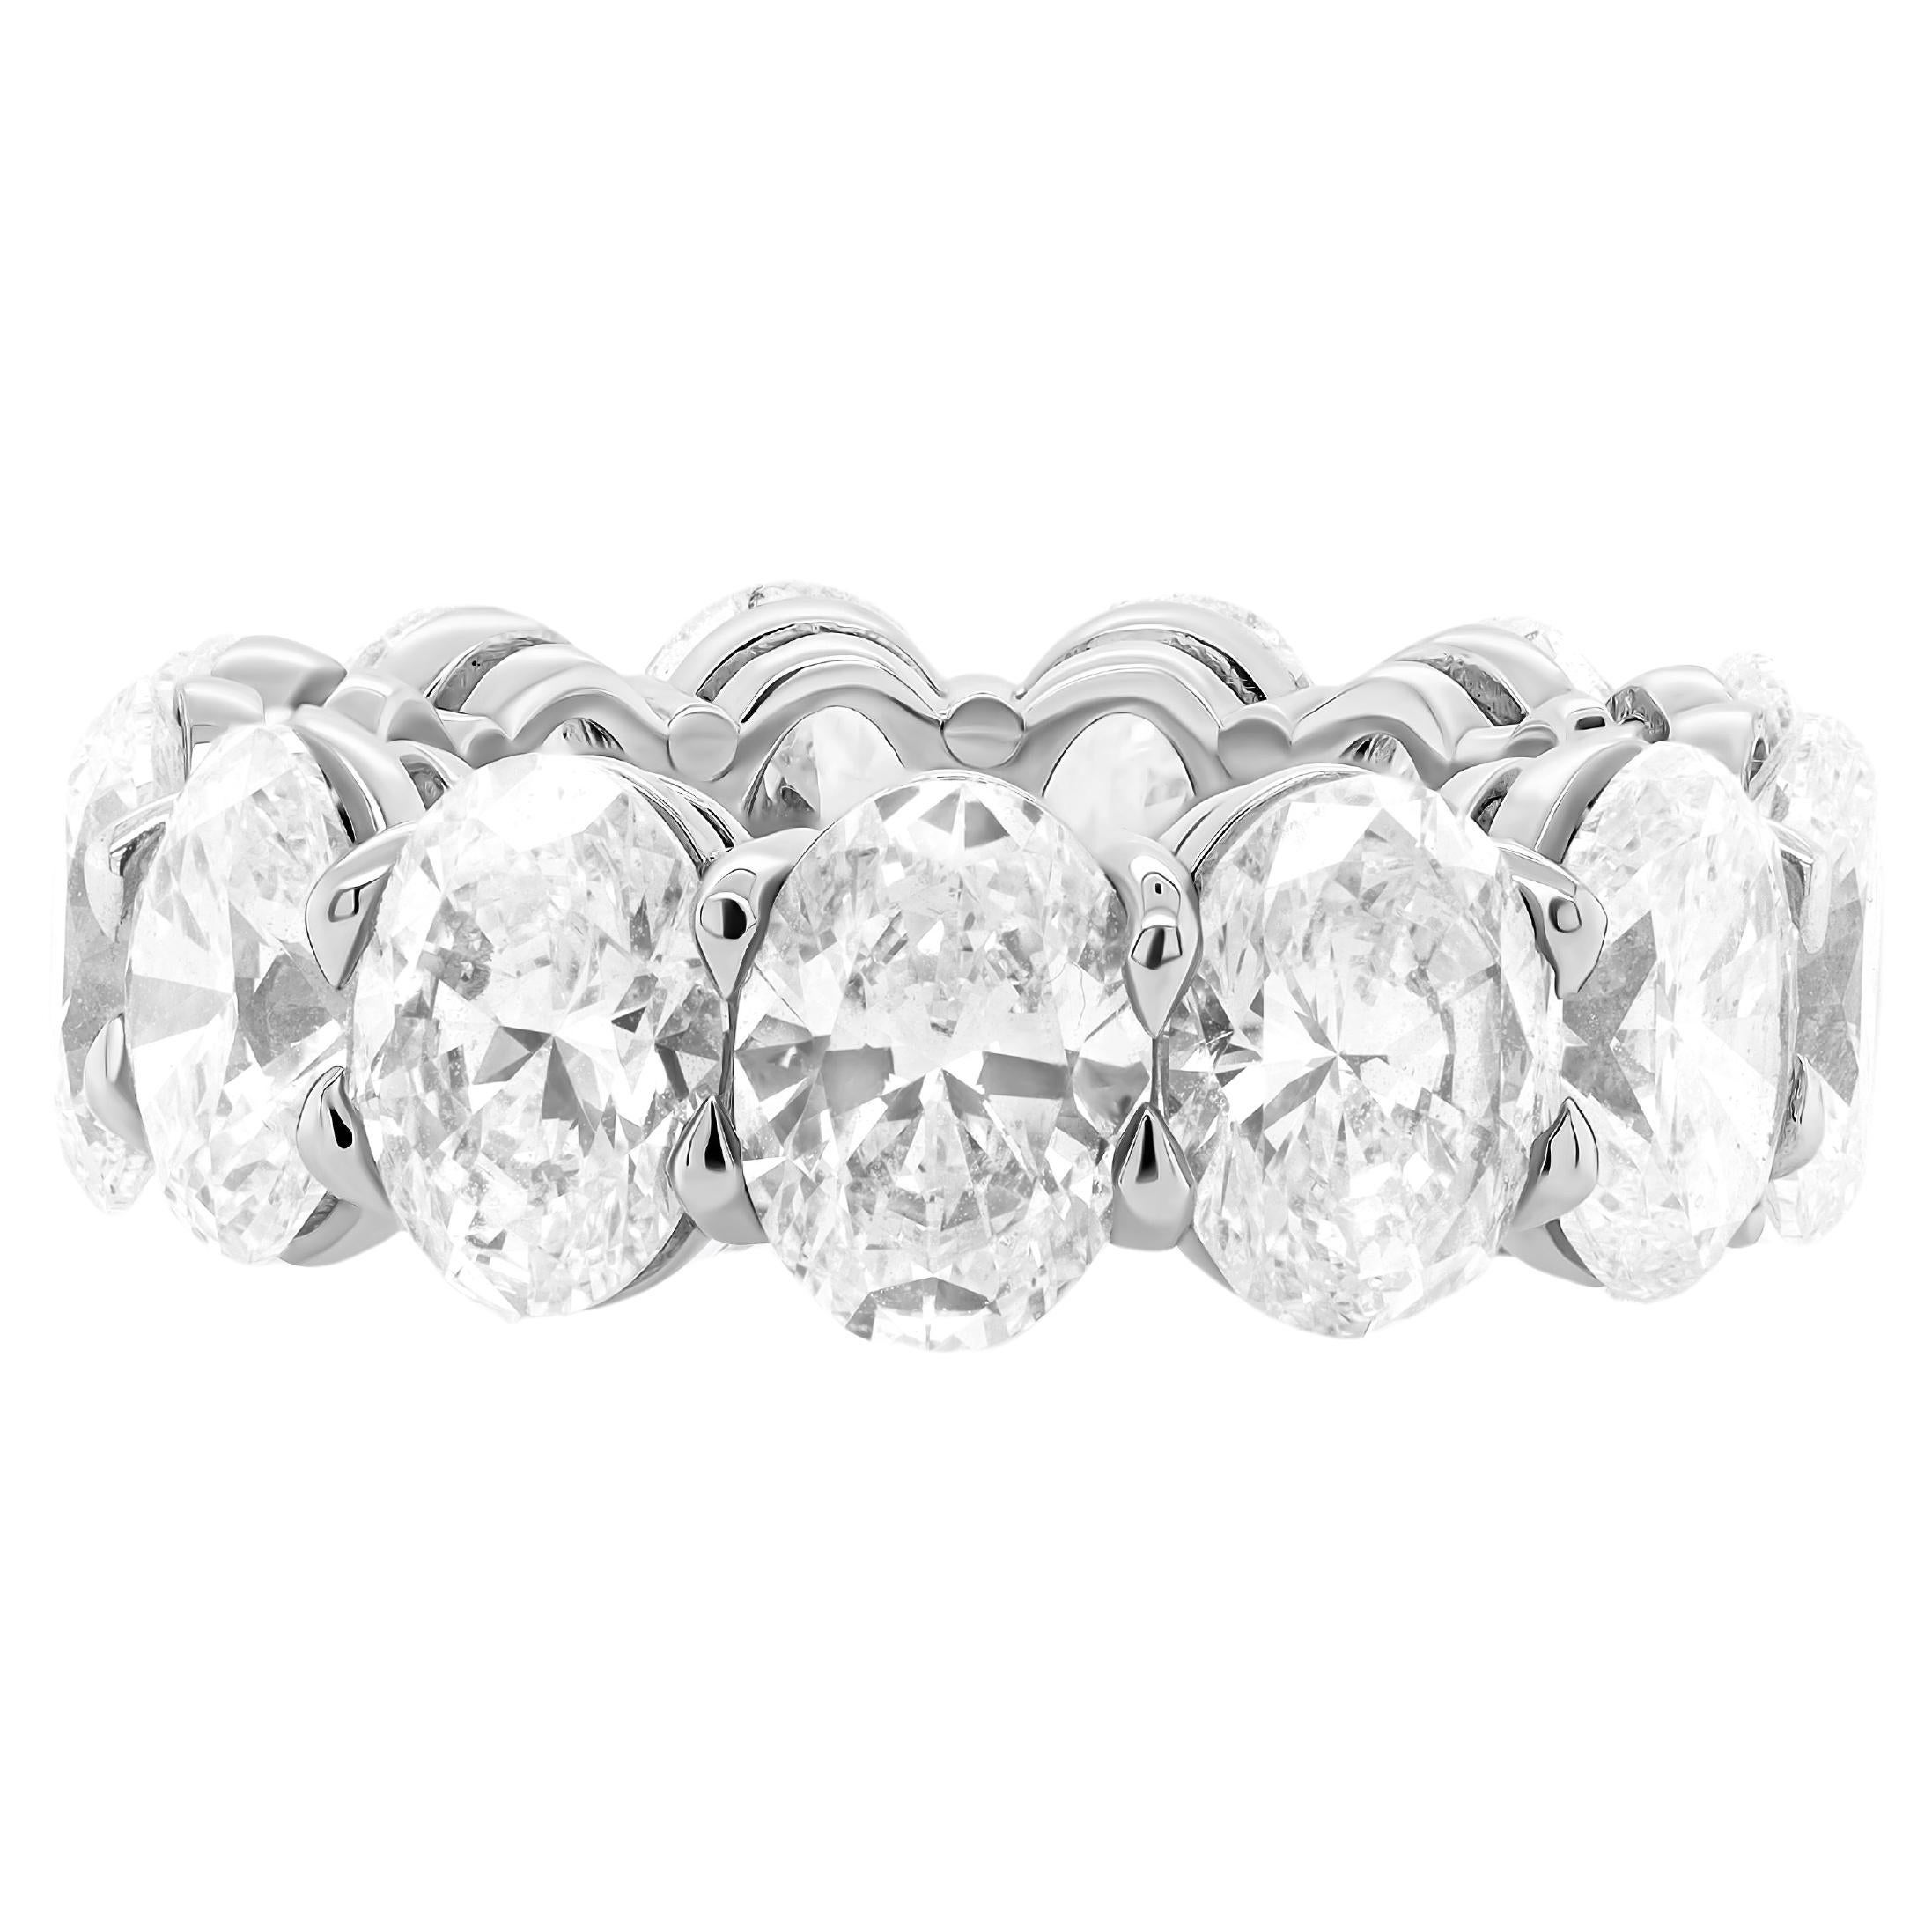 Diana M. PLATINUM OVAL DIAMONDS ETERNITY BAND, FEATURES 13.09 CT OF TOTAL WEIGHT